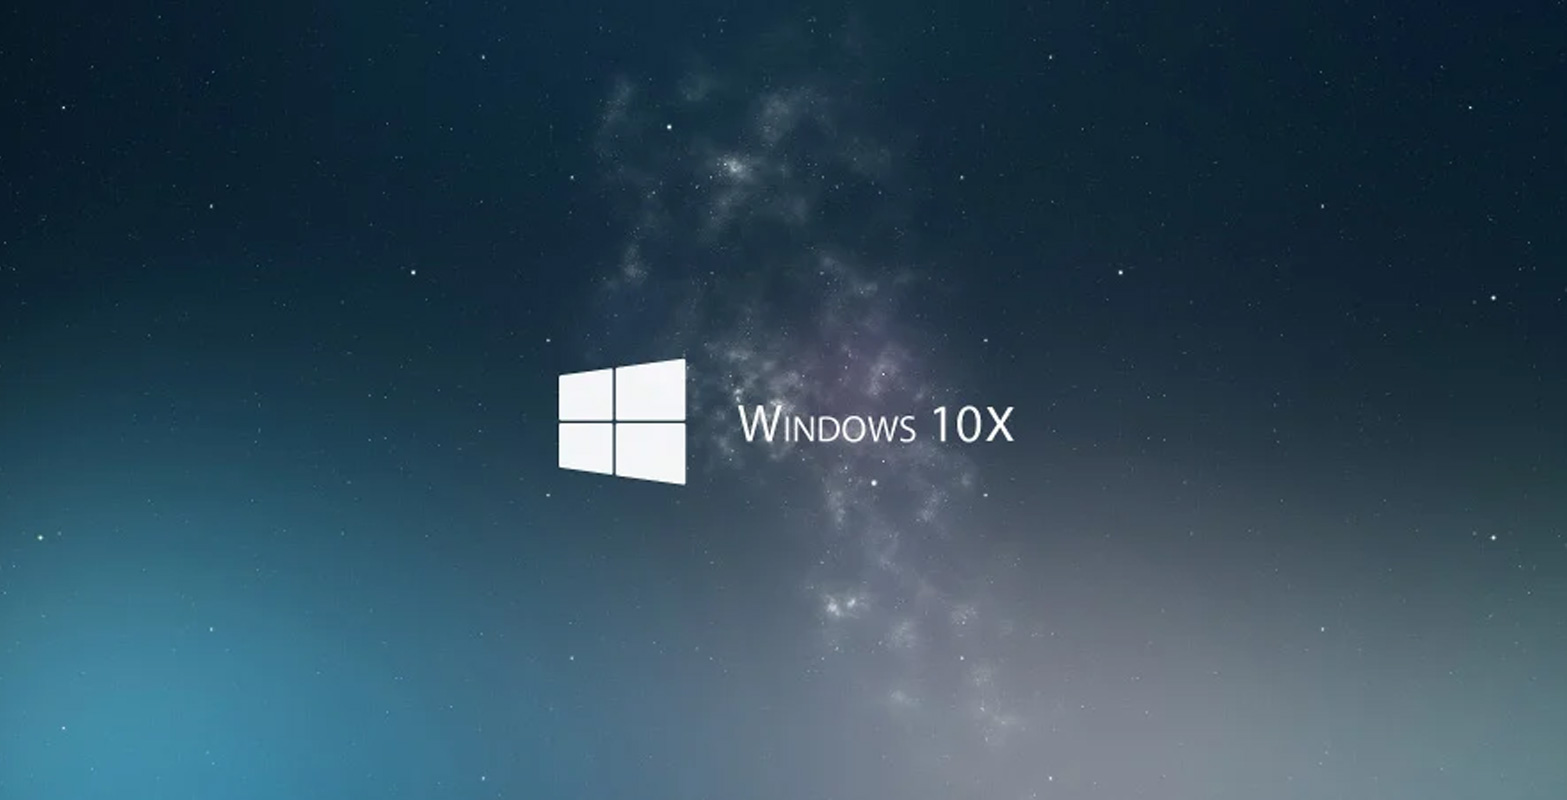 Windows 10X is arriving next year: What we know so far